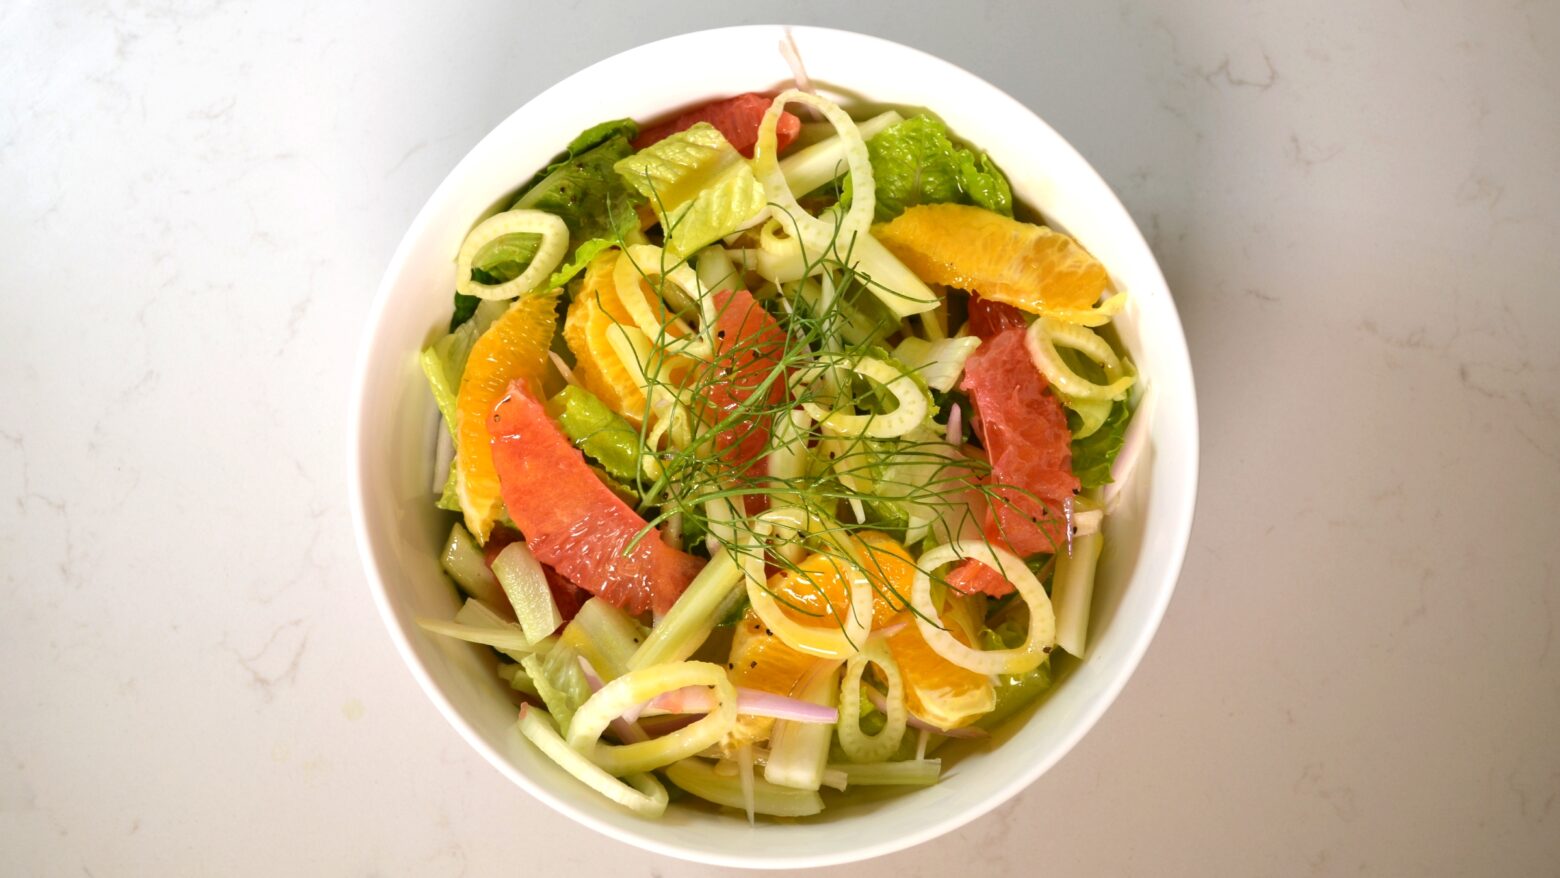 Above shot of a salad with slices of orange and grapefruit.